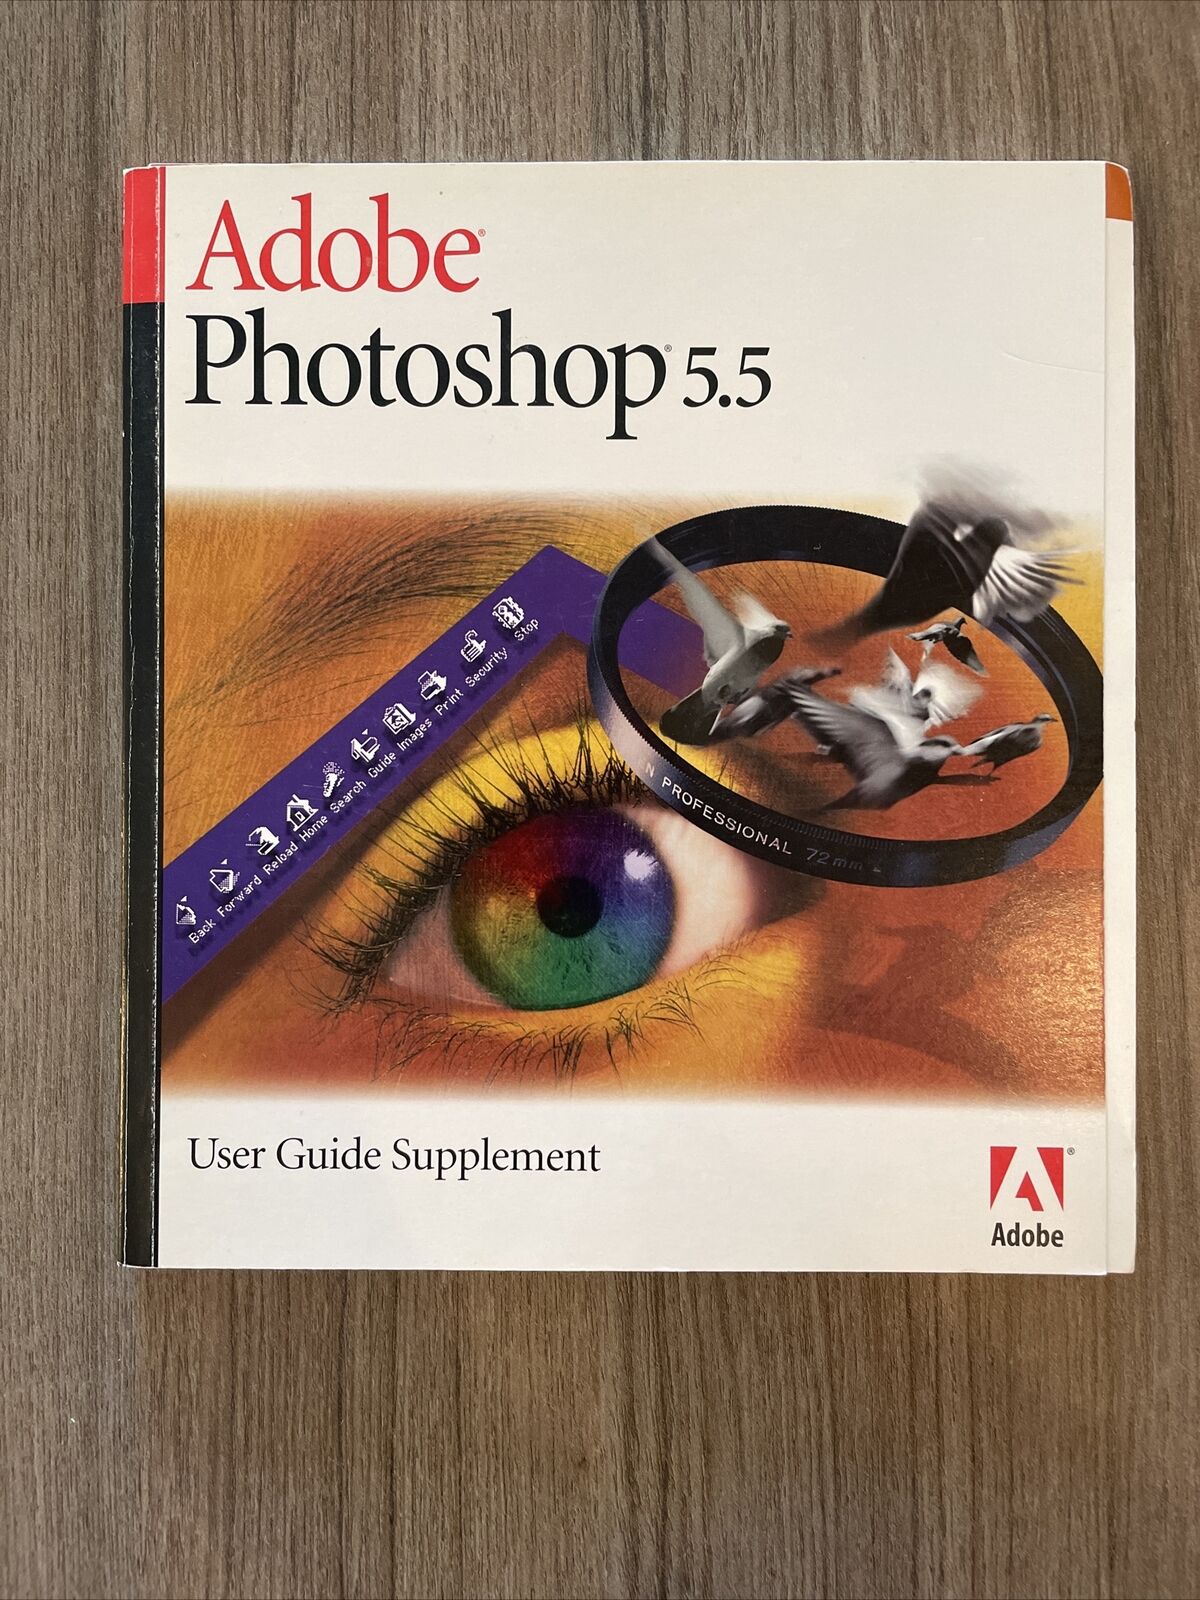 Adobe Photoshop 5.5 User Guide Supplement